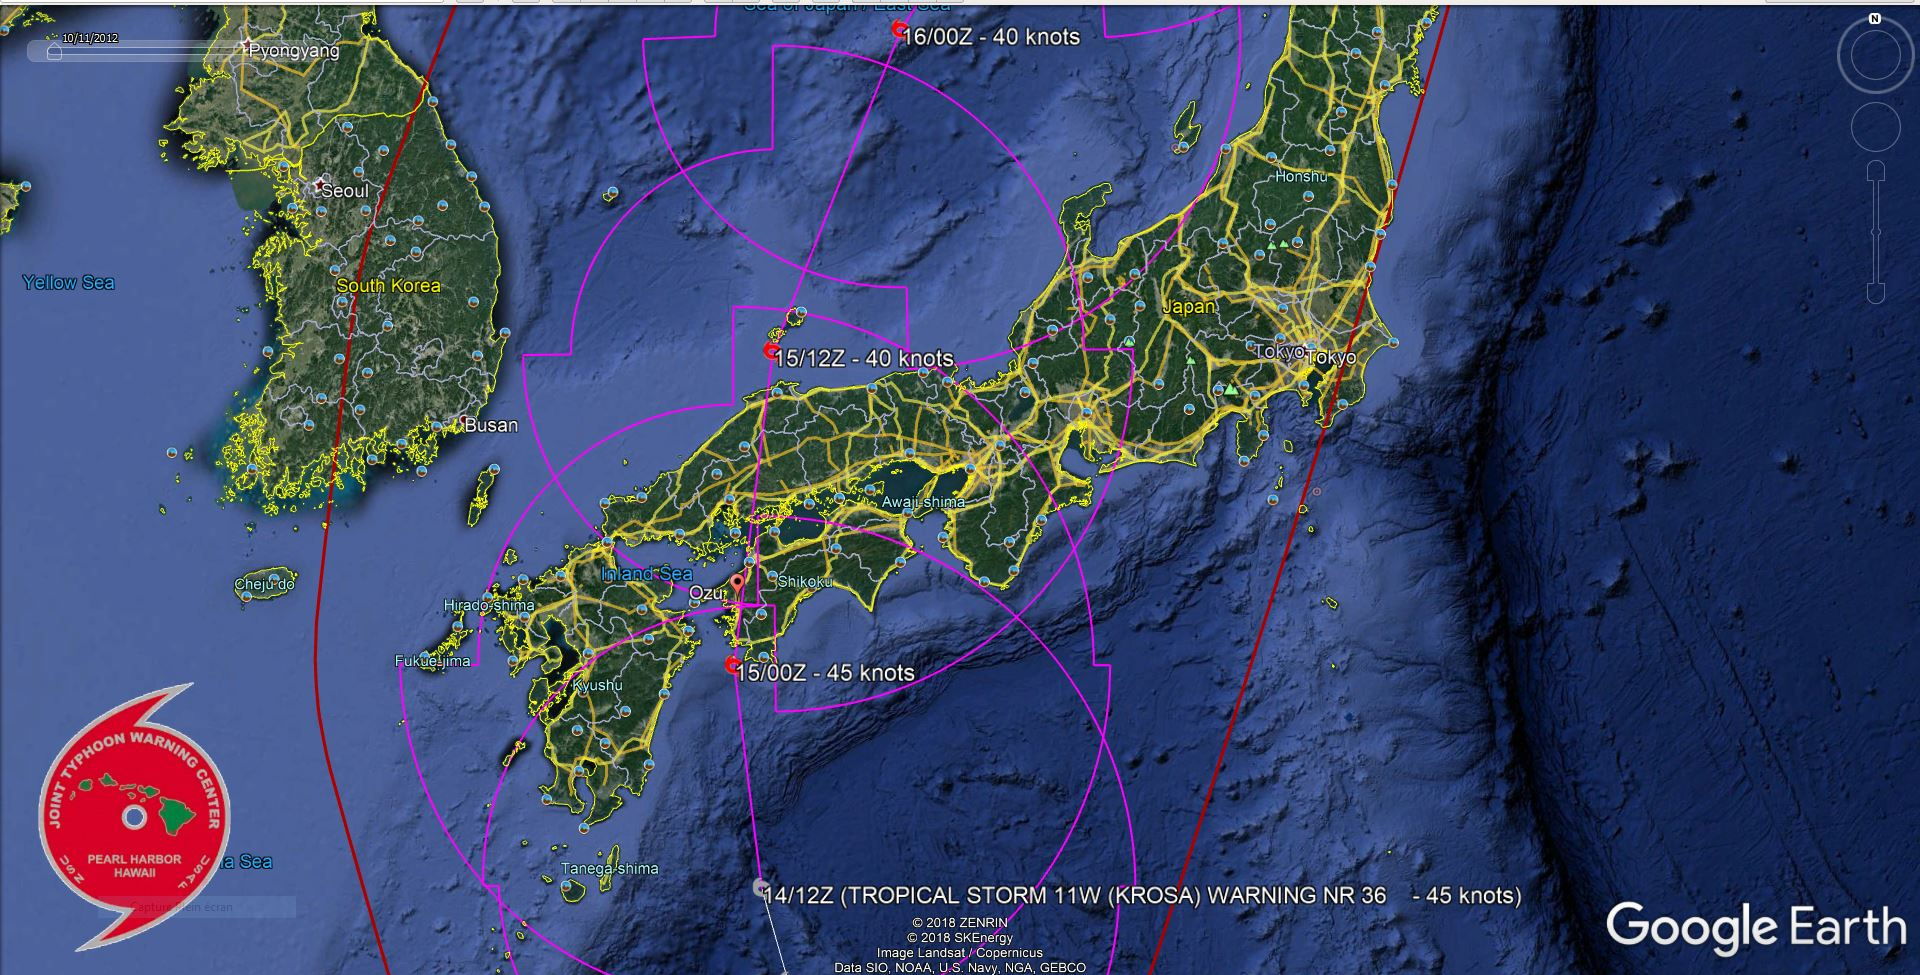 TS Krosa is accelerating northward, expected over cooler Sea of Japan within 24h